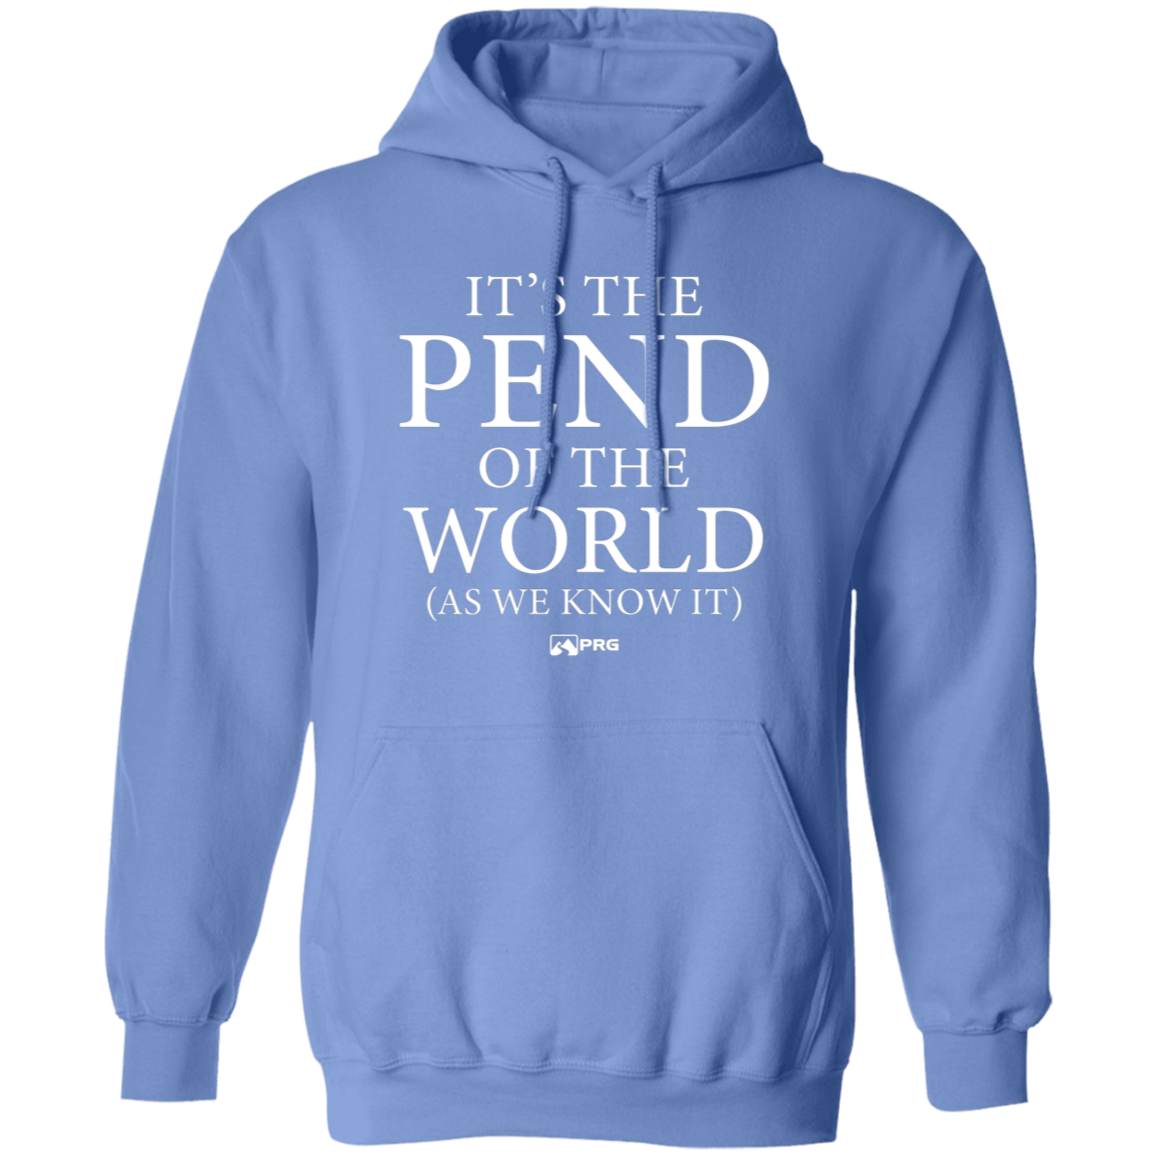 Pend of the World - Hoodie